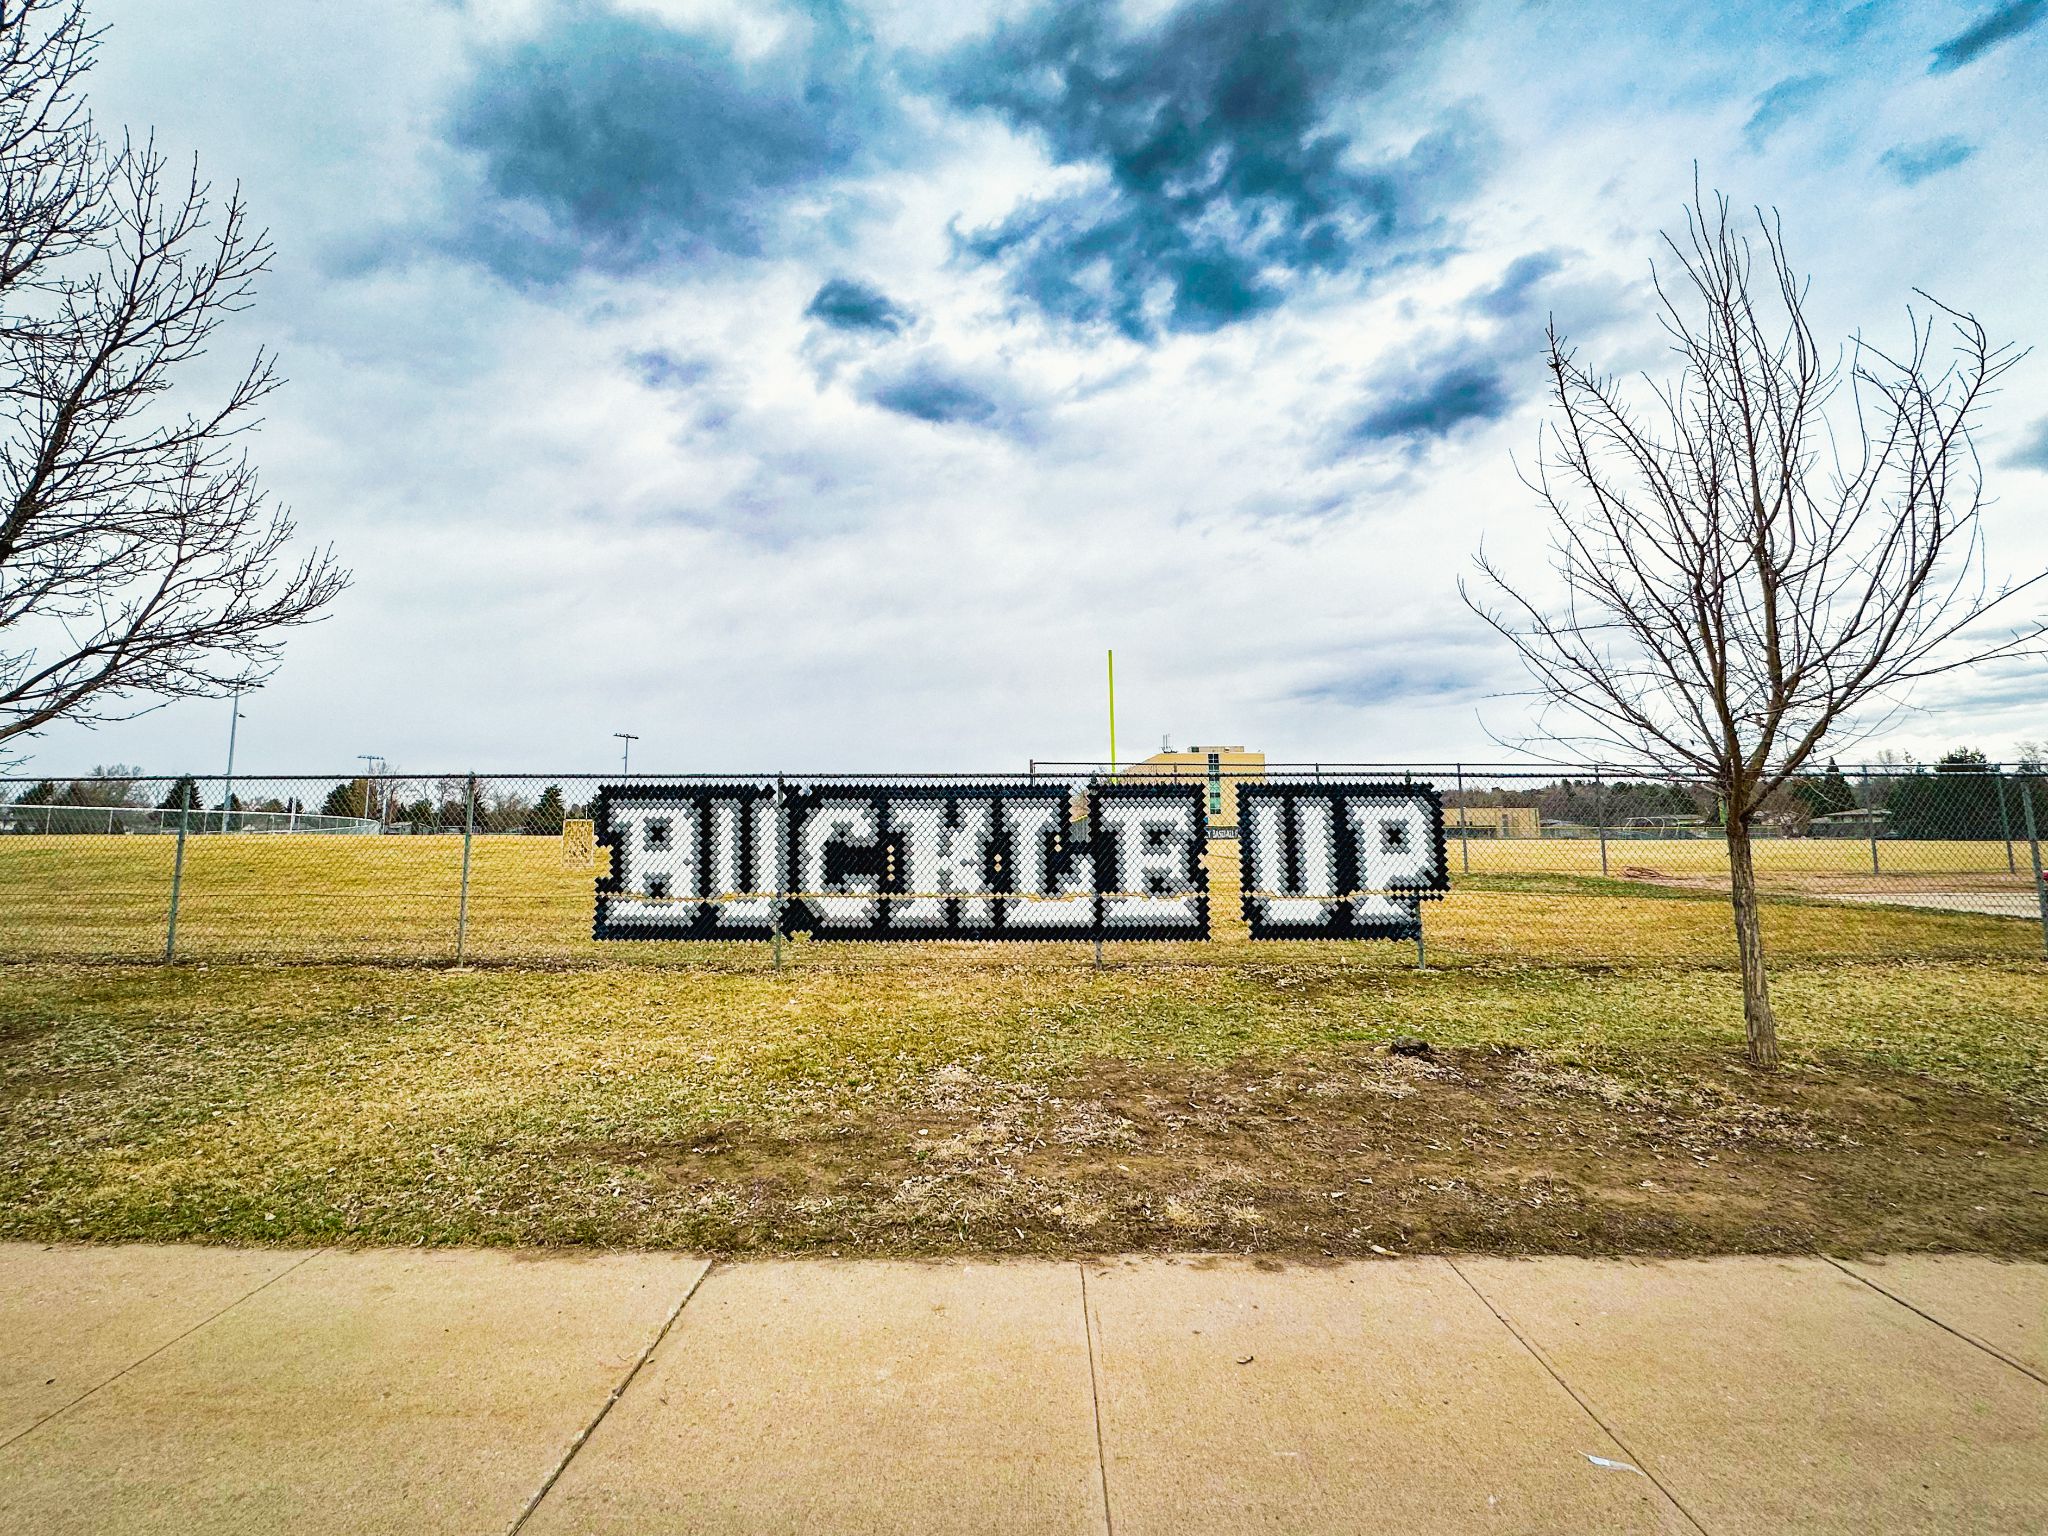 Buckle Up message installed with put-in cups in chain-link fence at John F Kennedy High School in Denver.jpg detail image